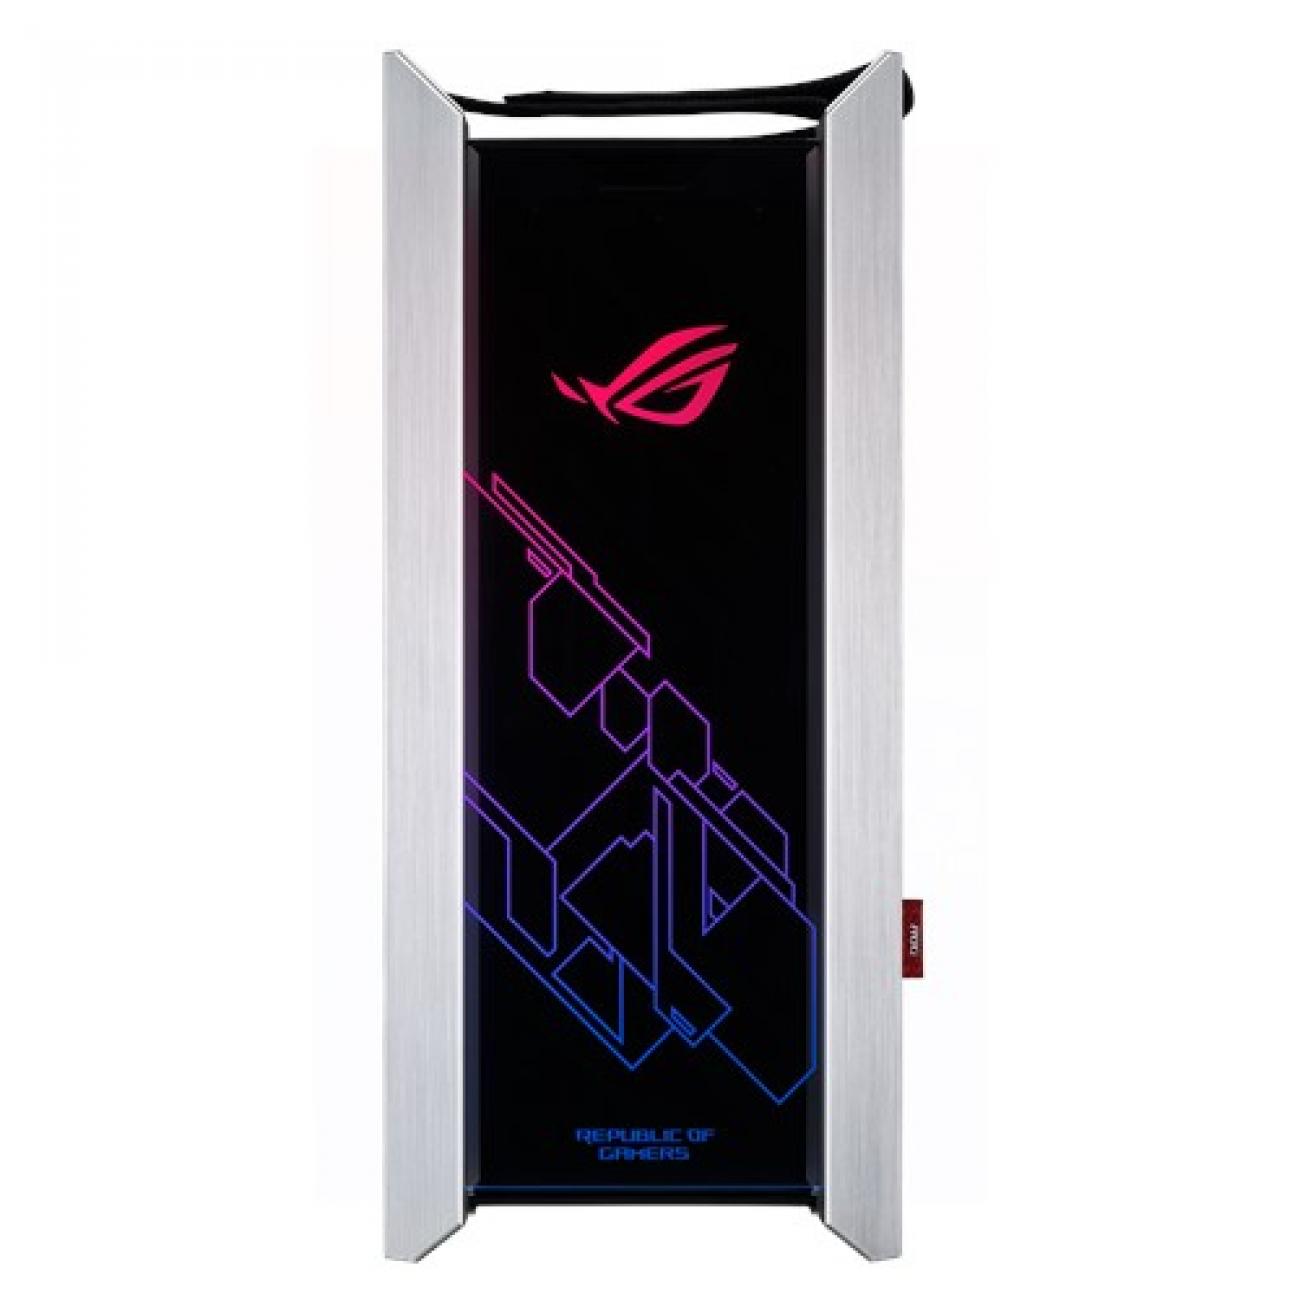 ASUS CASE GAMING GX601 ROG STRIX HELIOS WHITE MID TOWER, 8 2 SLOT ESPANSIONE, 3X140MM FRONT, 1X140MM